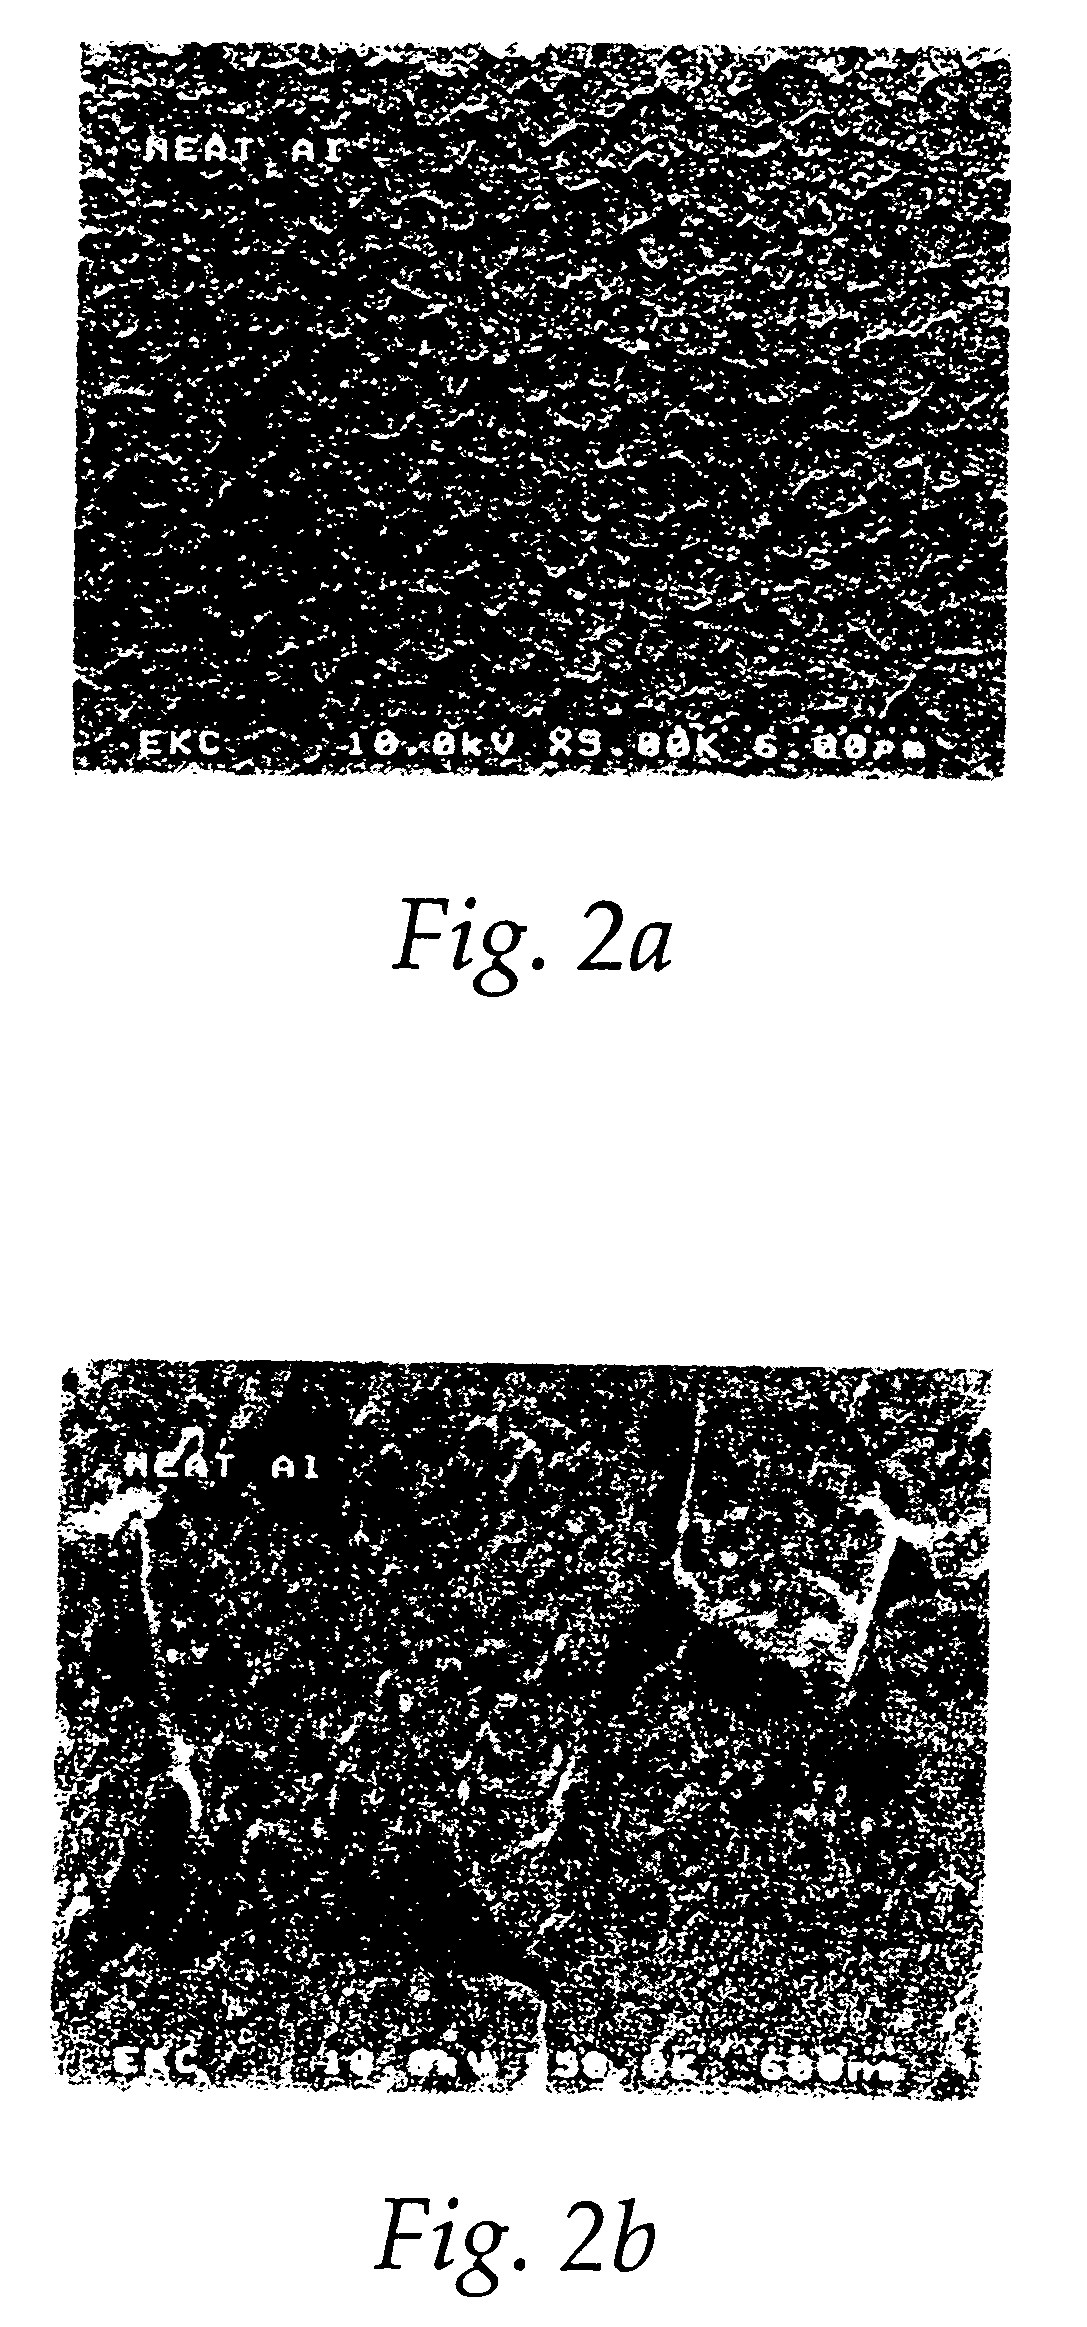 Forming a passivating aluminum fluoride layer and removing same for use in semiconductor manufacture